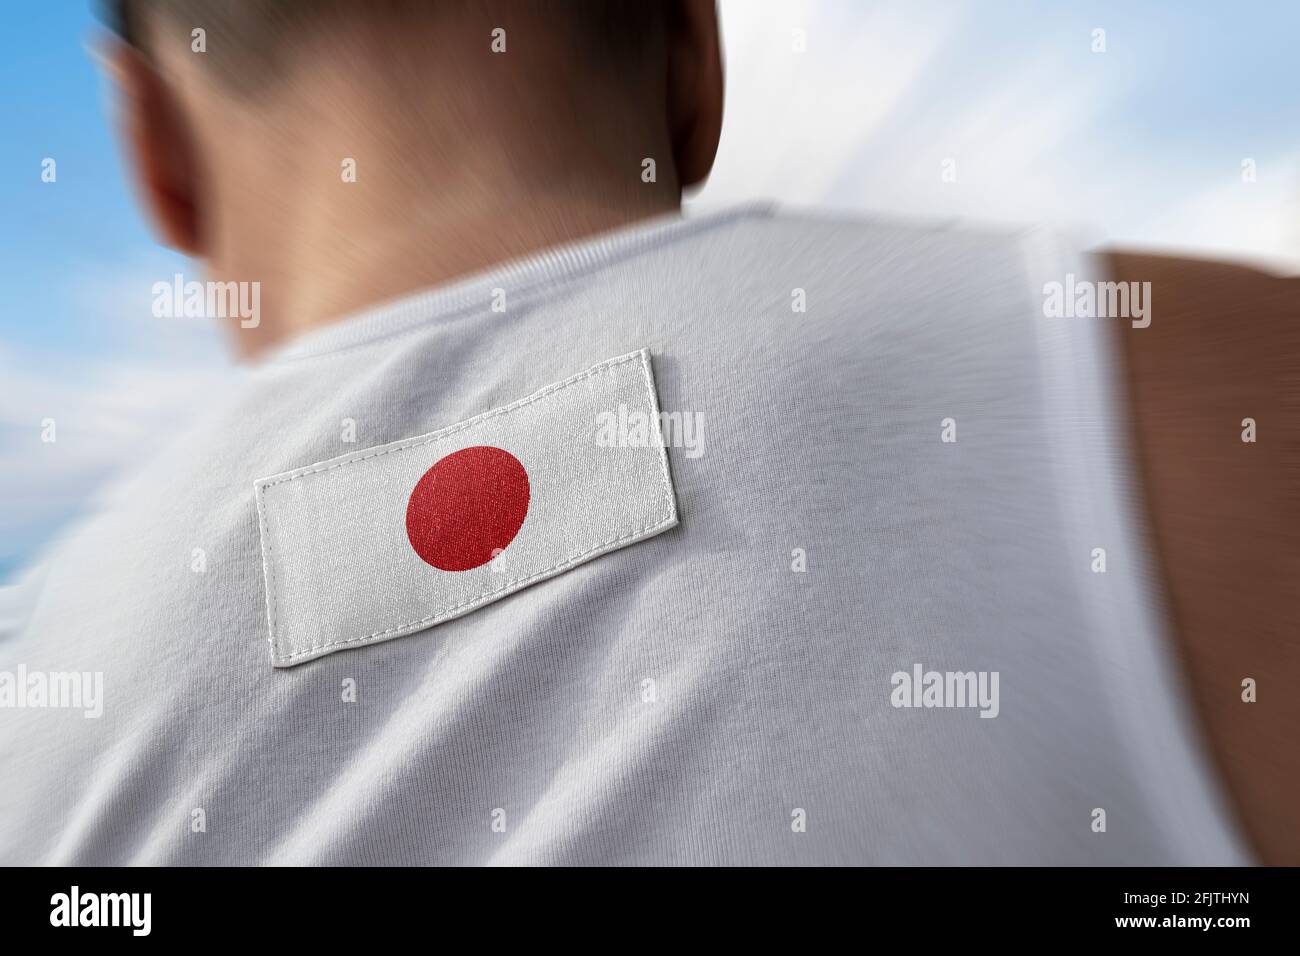 The national flag of Japan on the athlete's back Stock Photo